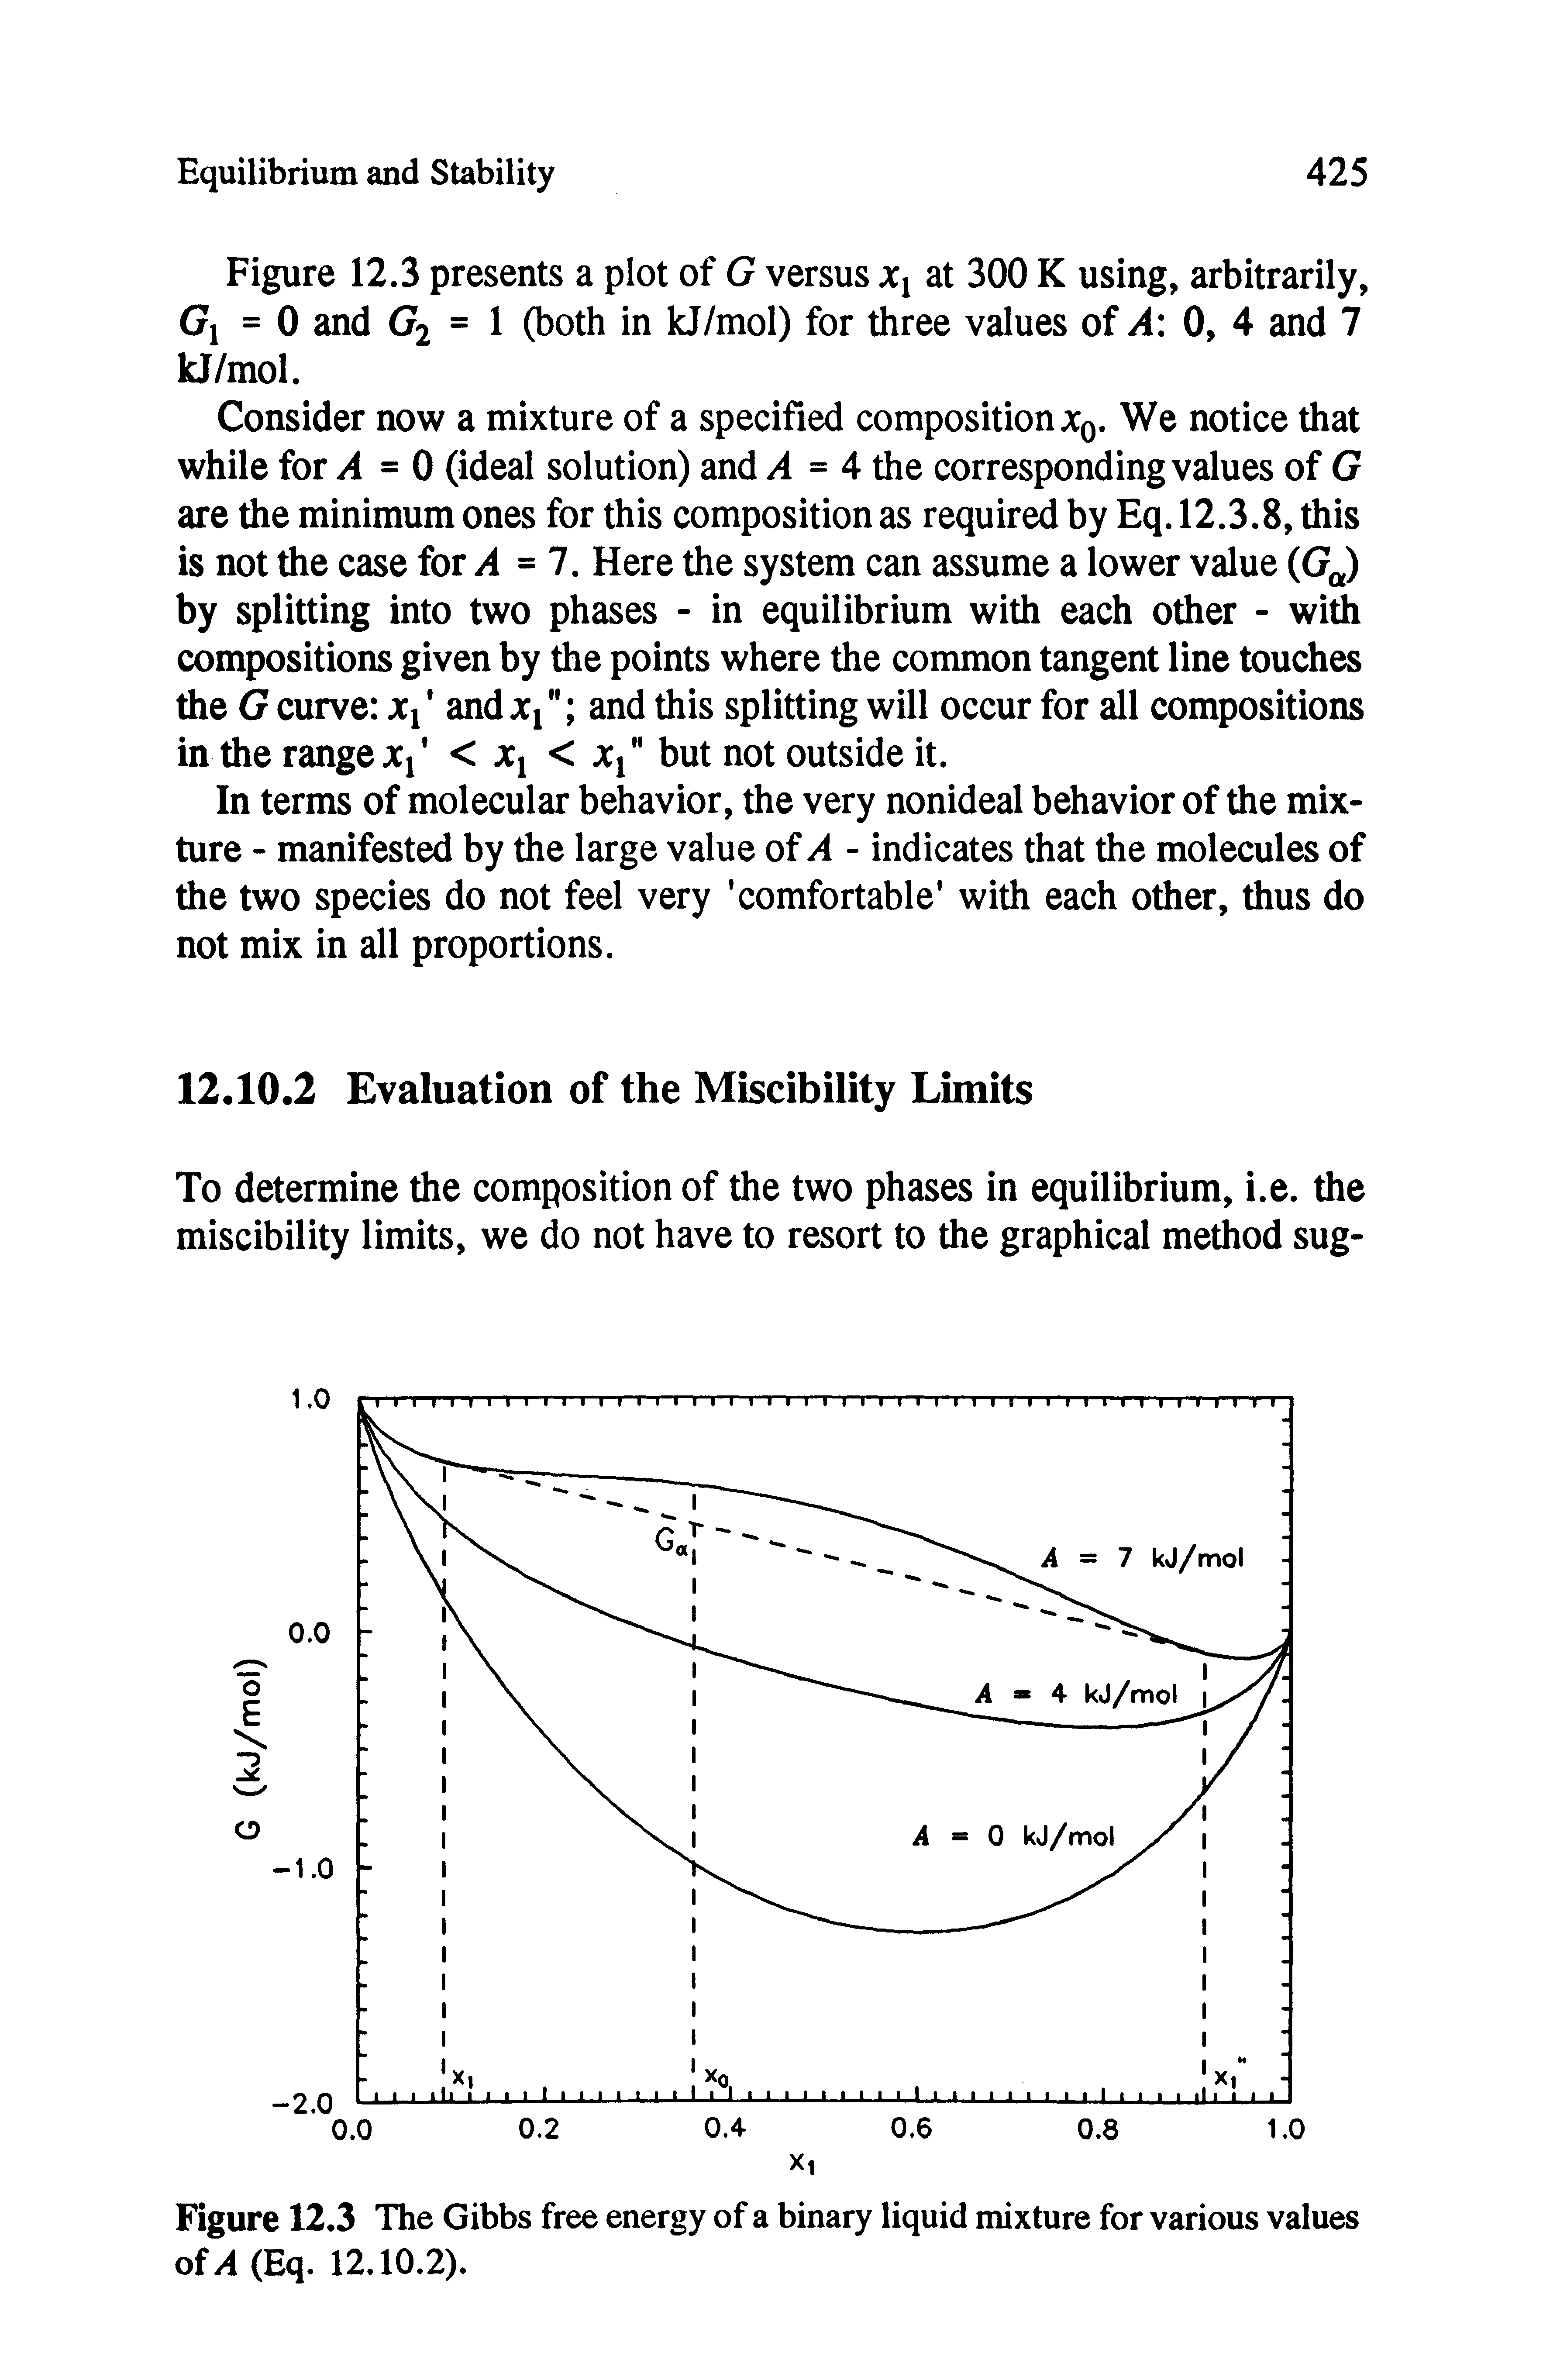 Figure 12.3 The Gibbs free energy of a binary liquid mixture for various values of (Eq. 12.10.2).